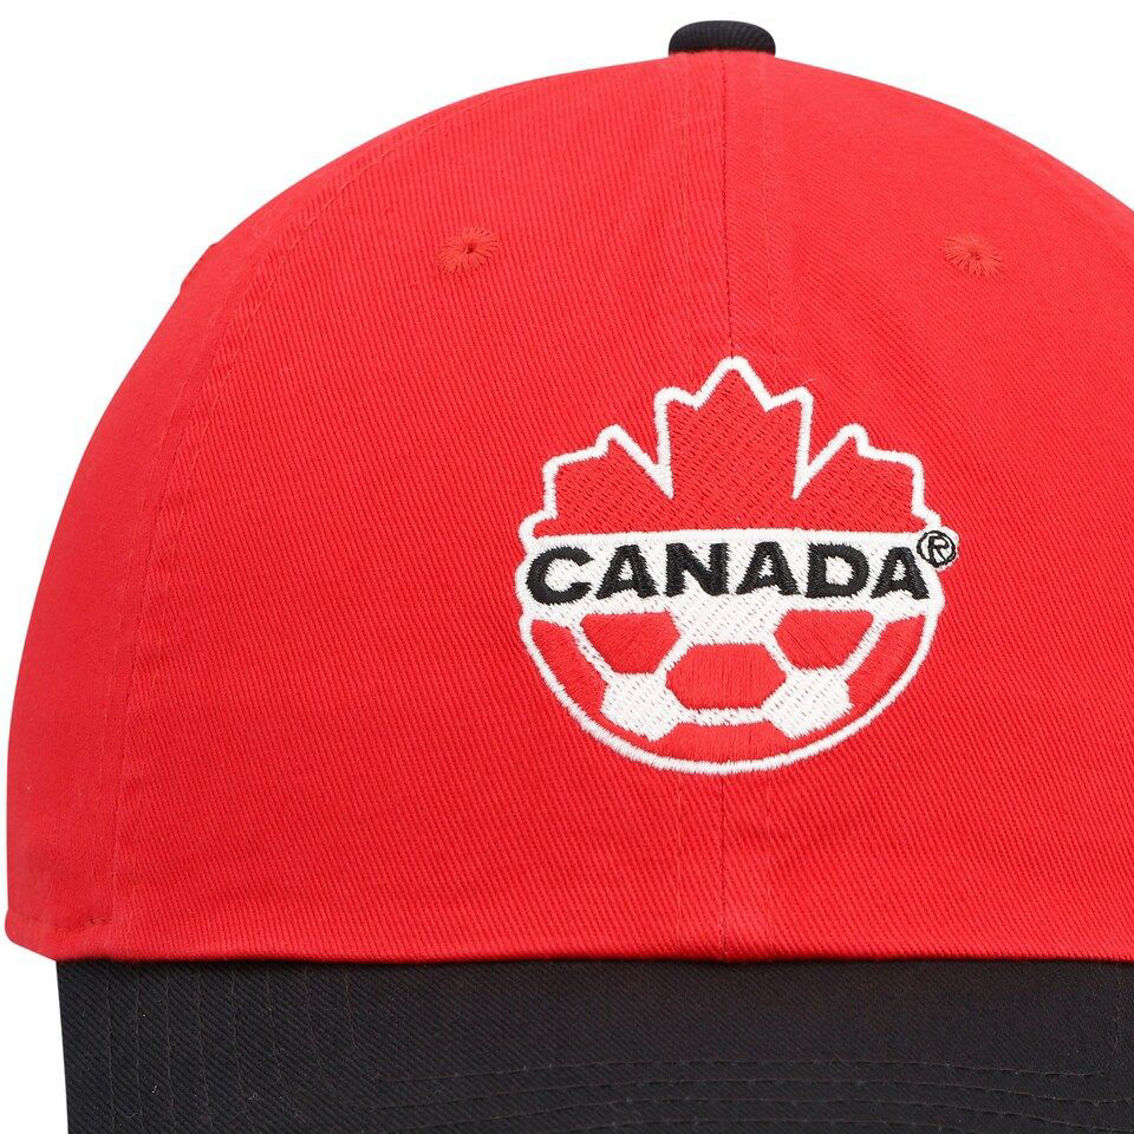 Nike Men's Red/Charcoal Canada Soccer Campus Adjustable Hat - Image 3 of 4